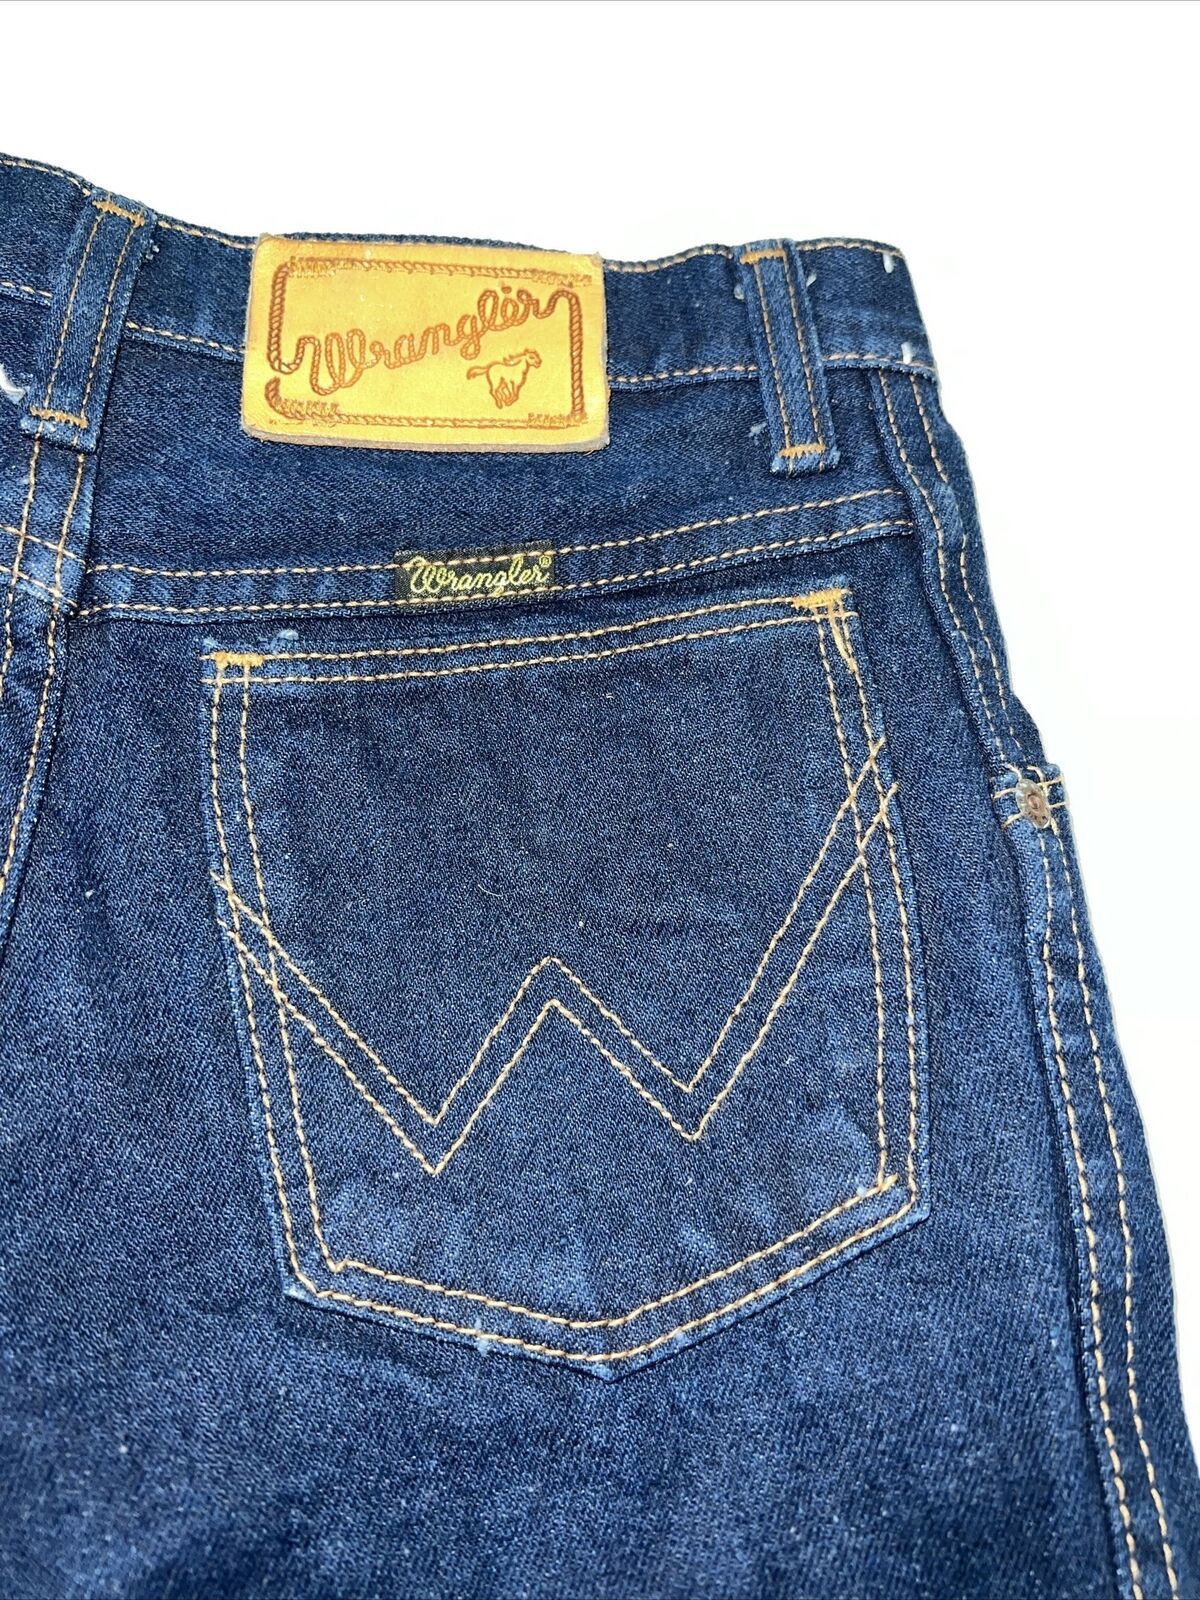 Vintage Wranglers Jeans Student Youth Dark Washed Pants Size 26x34